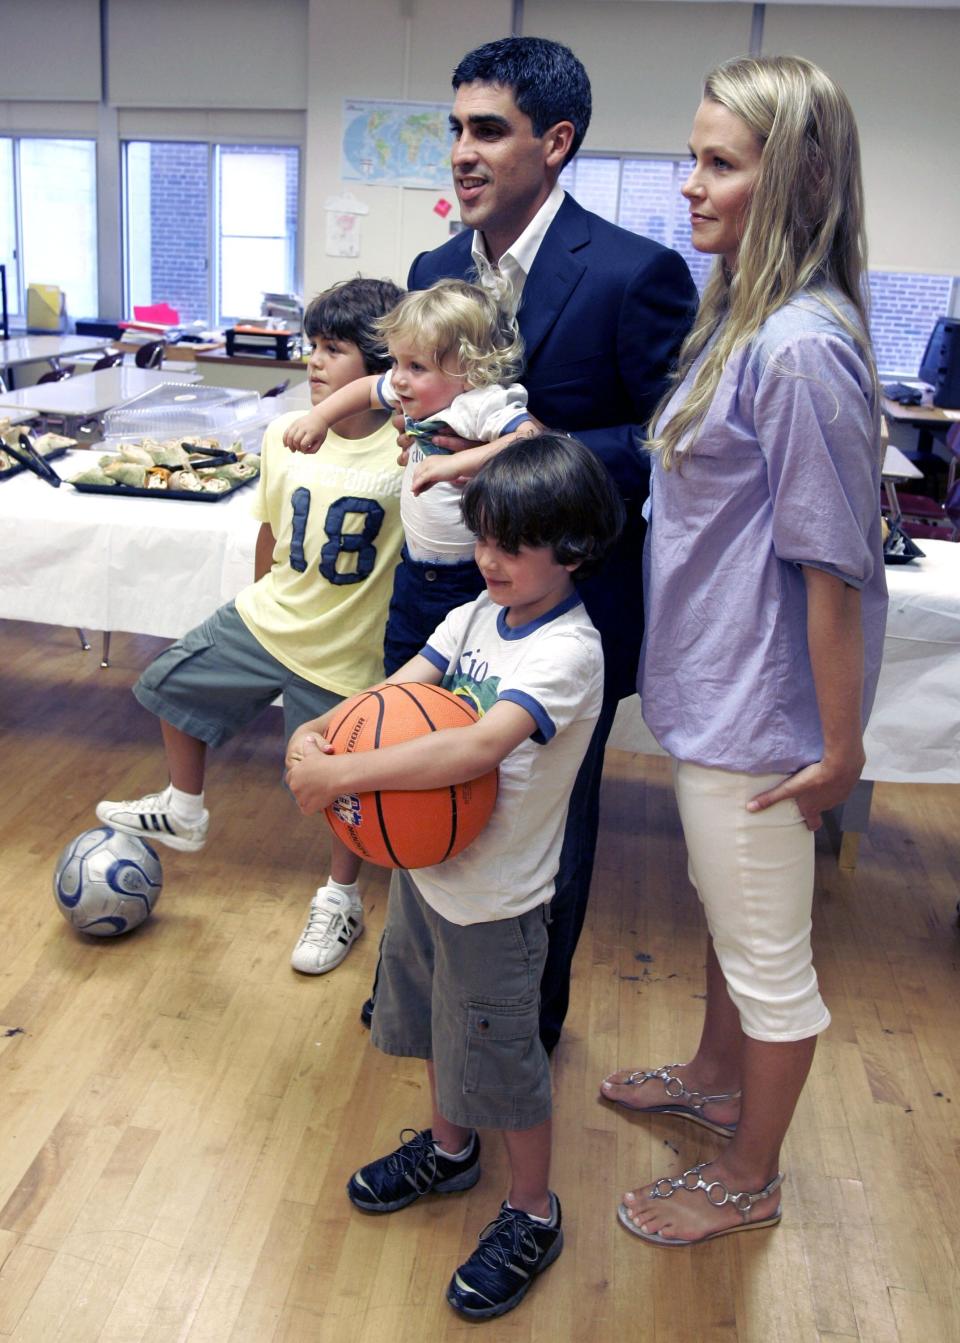 FILE - New York Red Bulls midfielder Claudio Reyna, top center, and his wife, Danielle, right, pose with their sons, Jack, 9, Joah, 17 months, and Giovanni, 5, from left, before a news conference in Newark, N.J., July 16, 2008, to announce Reyna's retirement from soccer. The U.S. men's soccer team was plunged into public turmoil Wednesday, Jan. 4, 2023, when the Reyna family said it notified the U.S. Soccer Federation of a decades-old incident involving Gregg Berhalter and his wife in response to the coach’s disparagement of young star Gio Reyna. (AP Photo/Mike Derer, File)